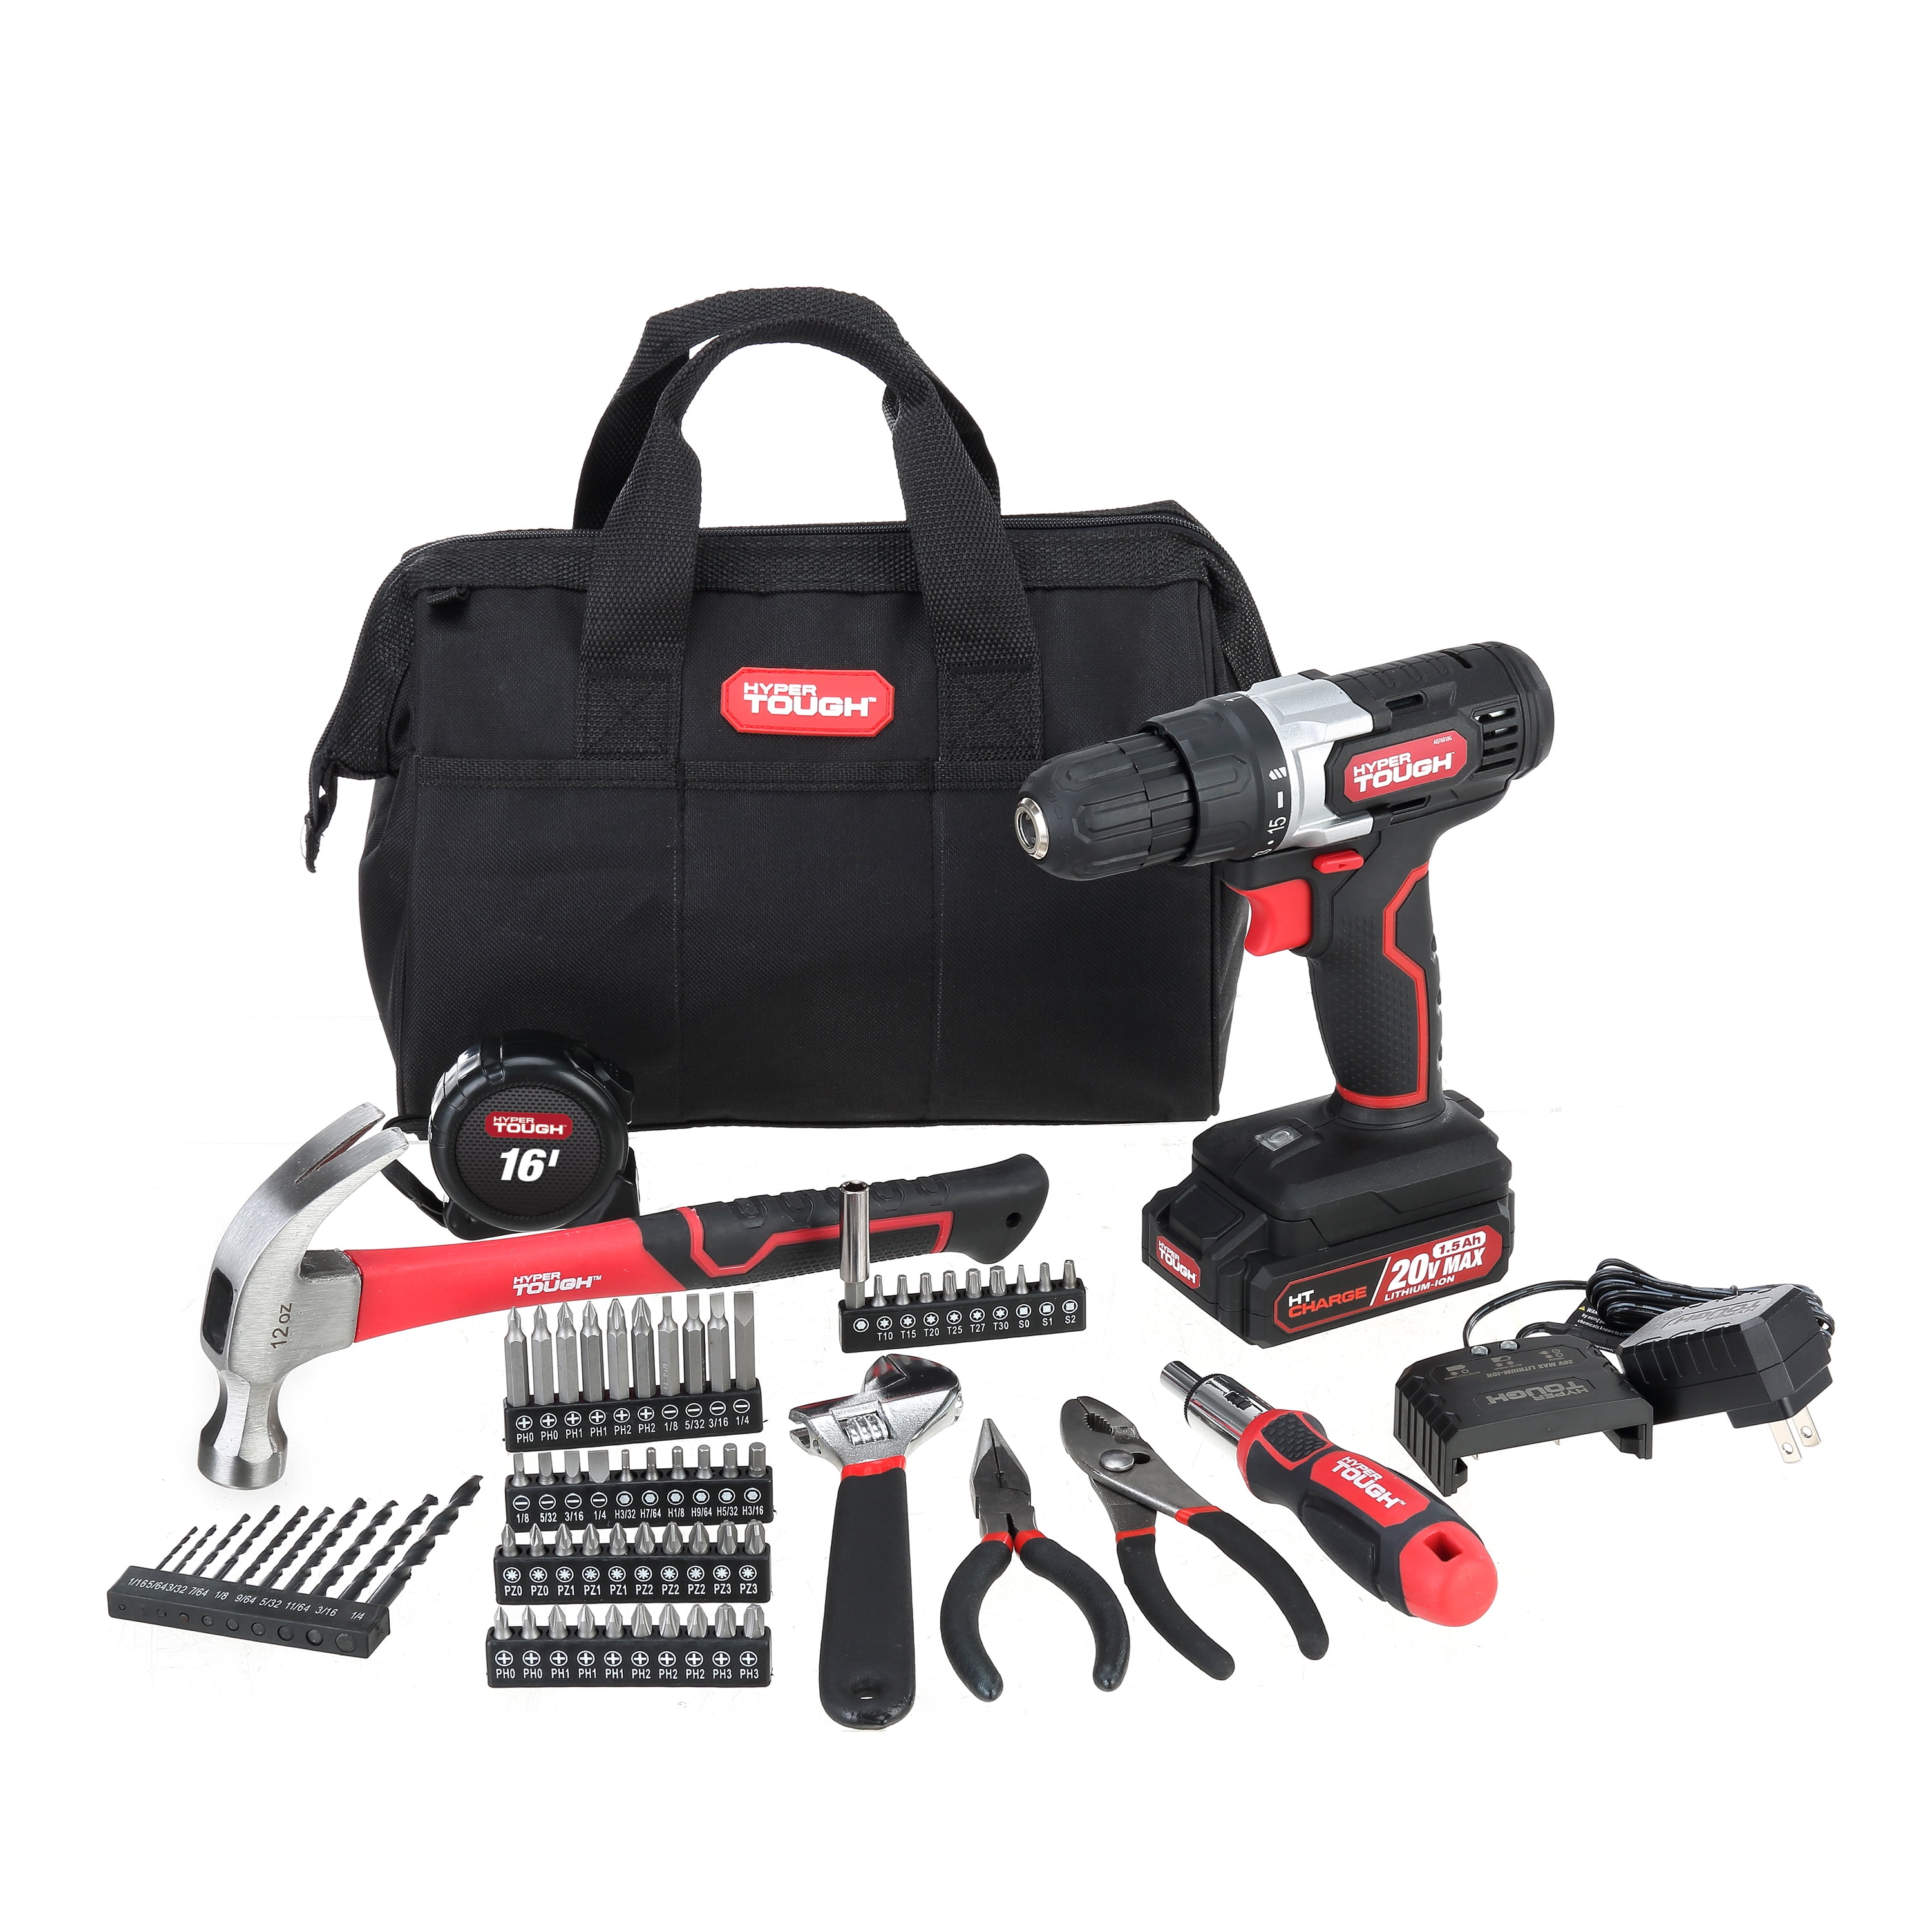 BLACK+DECKER 20V MAX Lithium-Ion Cordless 4 Tool Combo Kit with (2) 1.5Ah  Batteries and Charger BD4KITCDCRL - The Home Depot